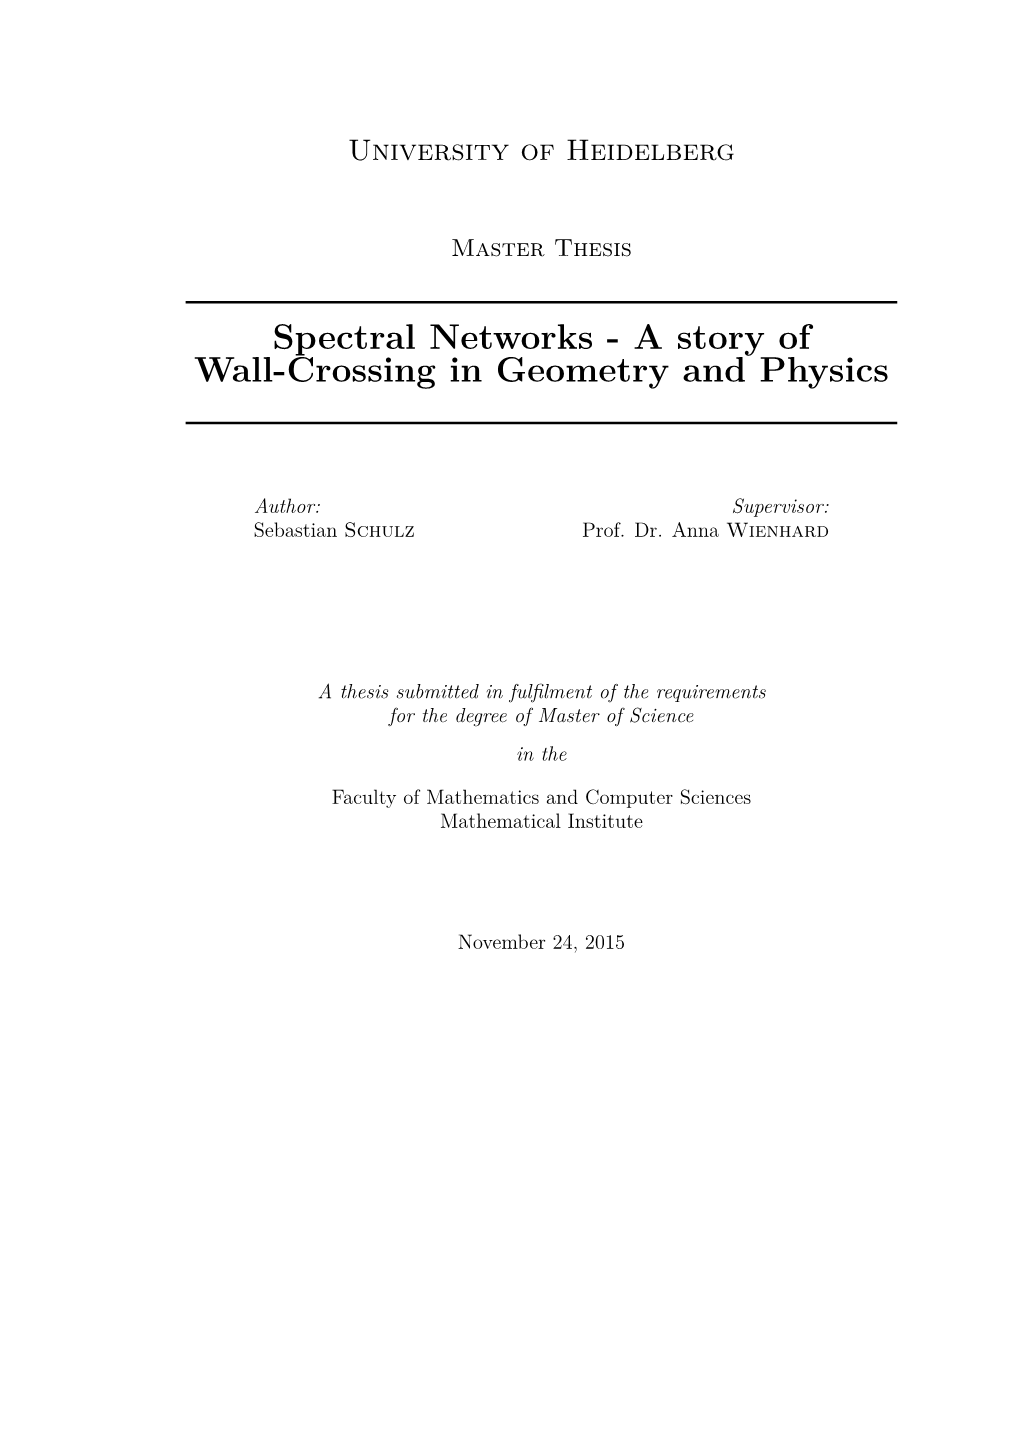 Spectral Networks - a Story of Wall-Crossing in Geometry and Physics